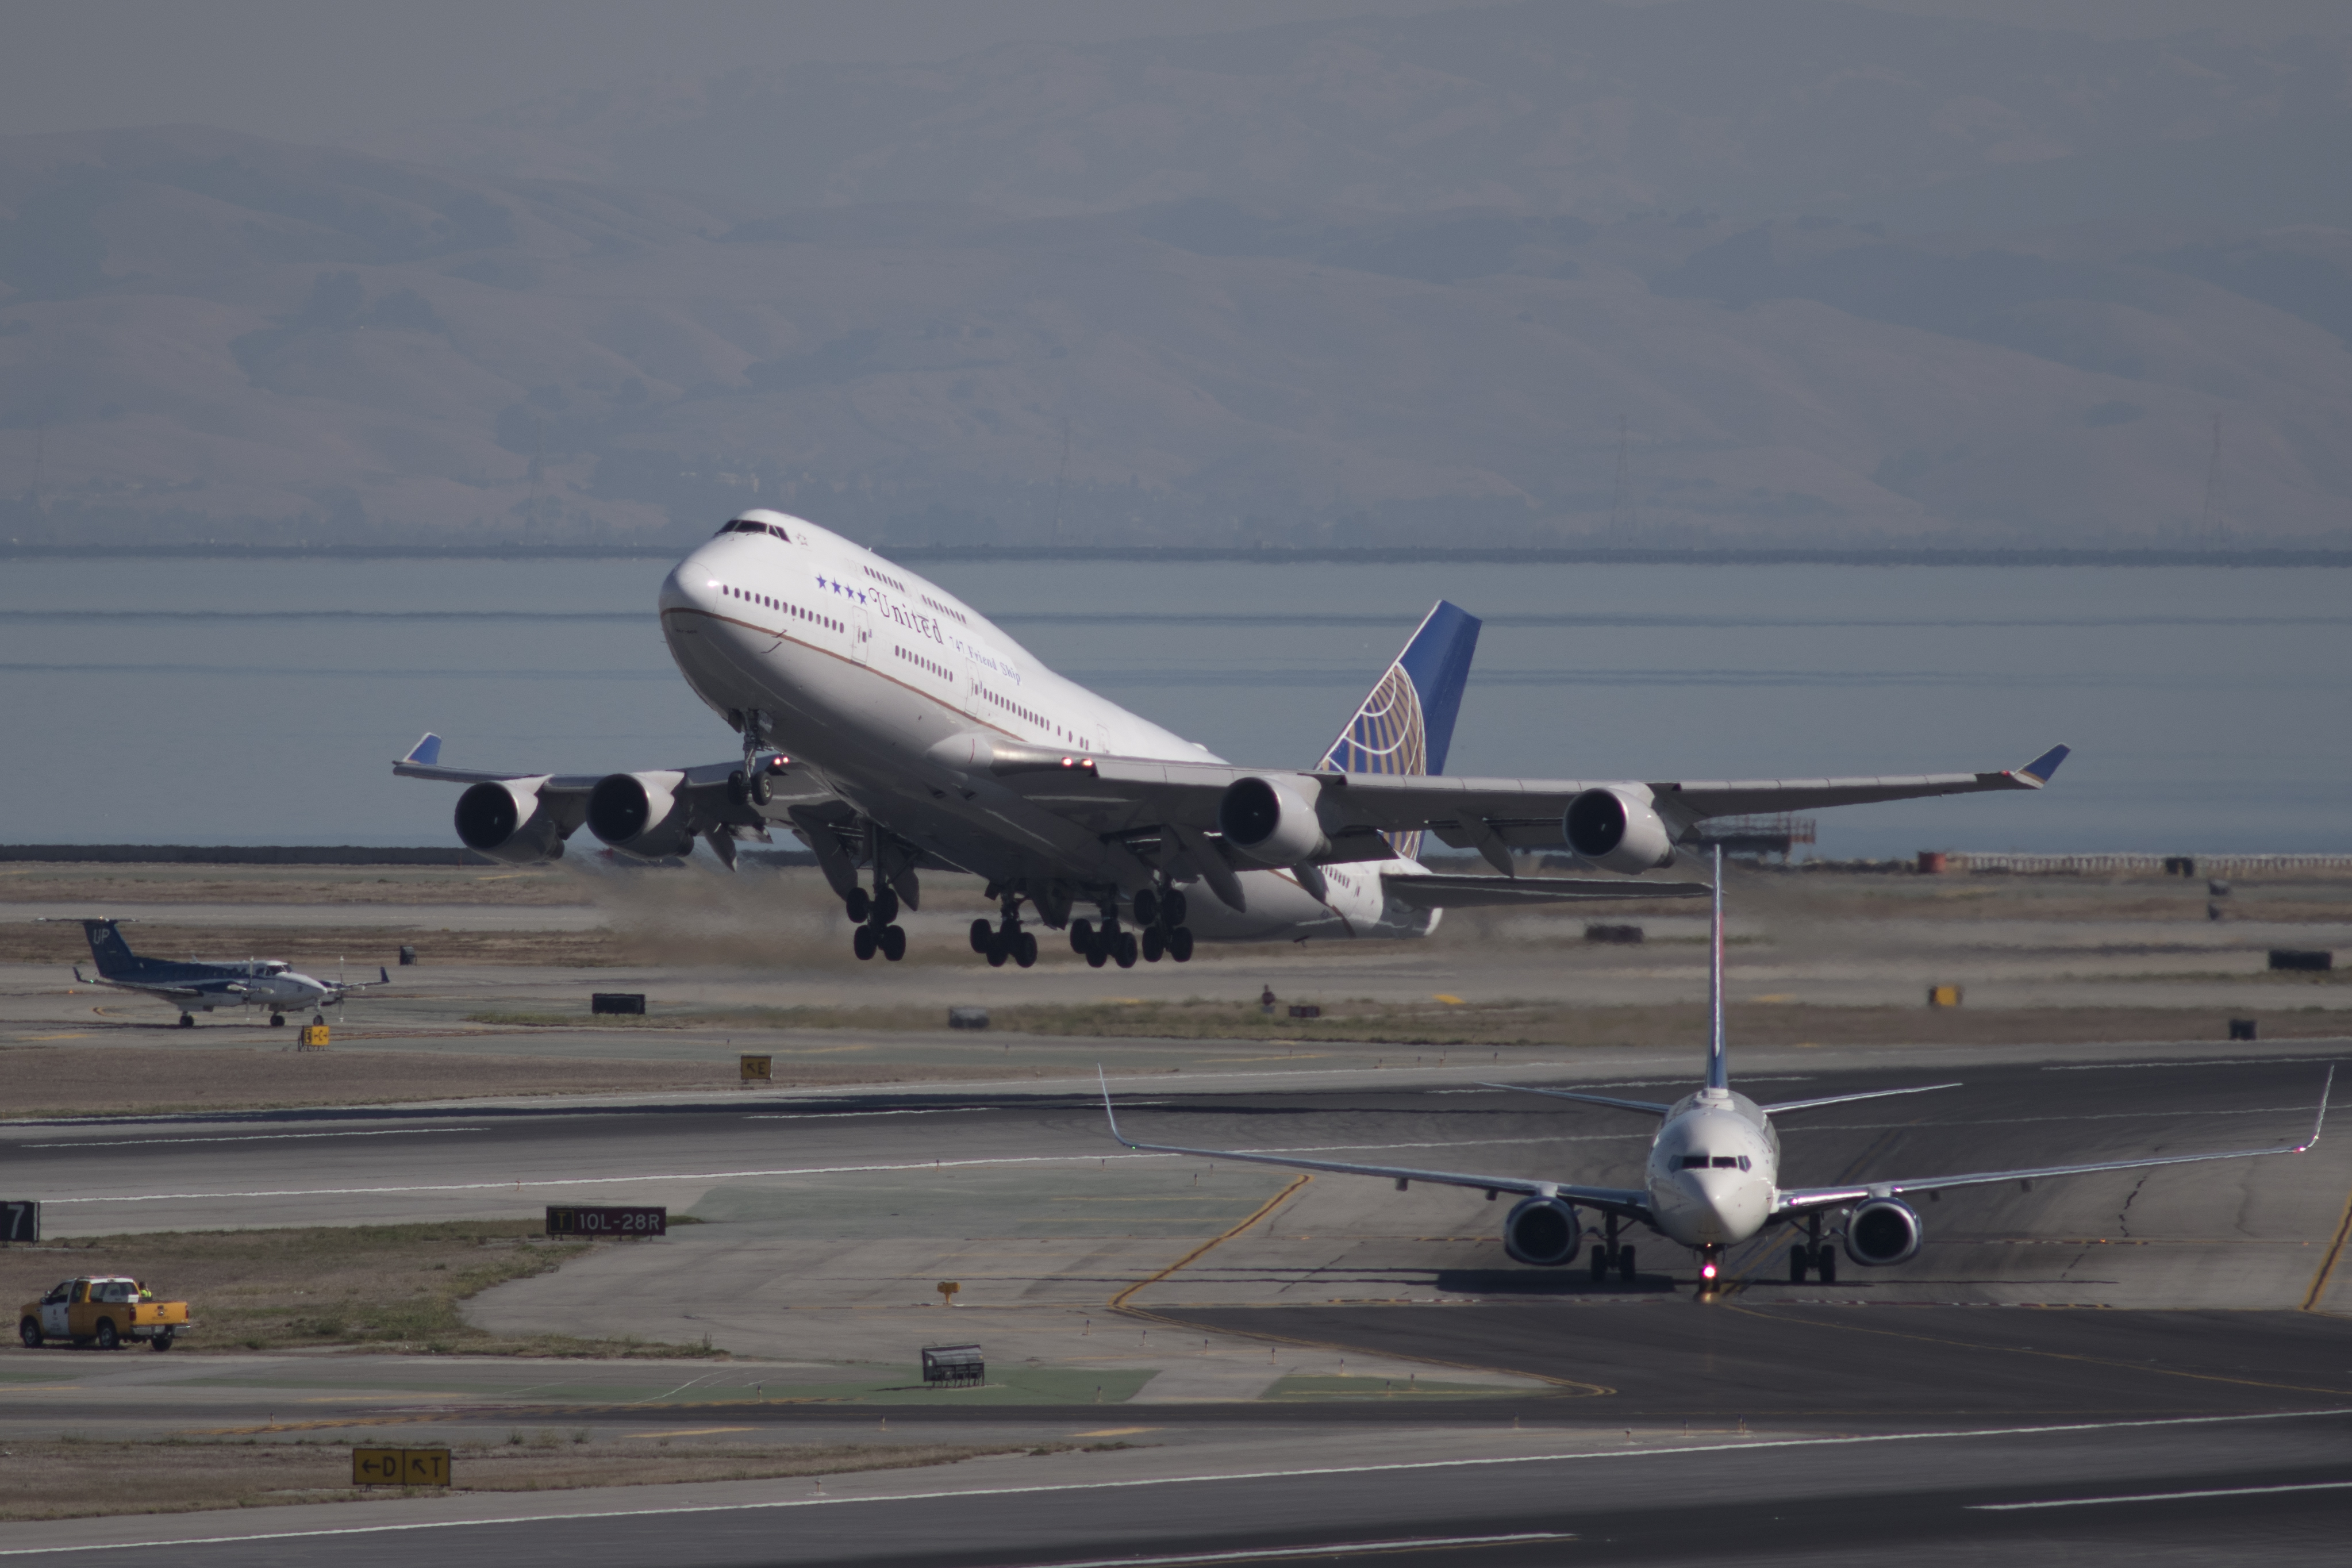 United Airlines Boeing 747 performed its last passenger flight